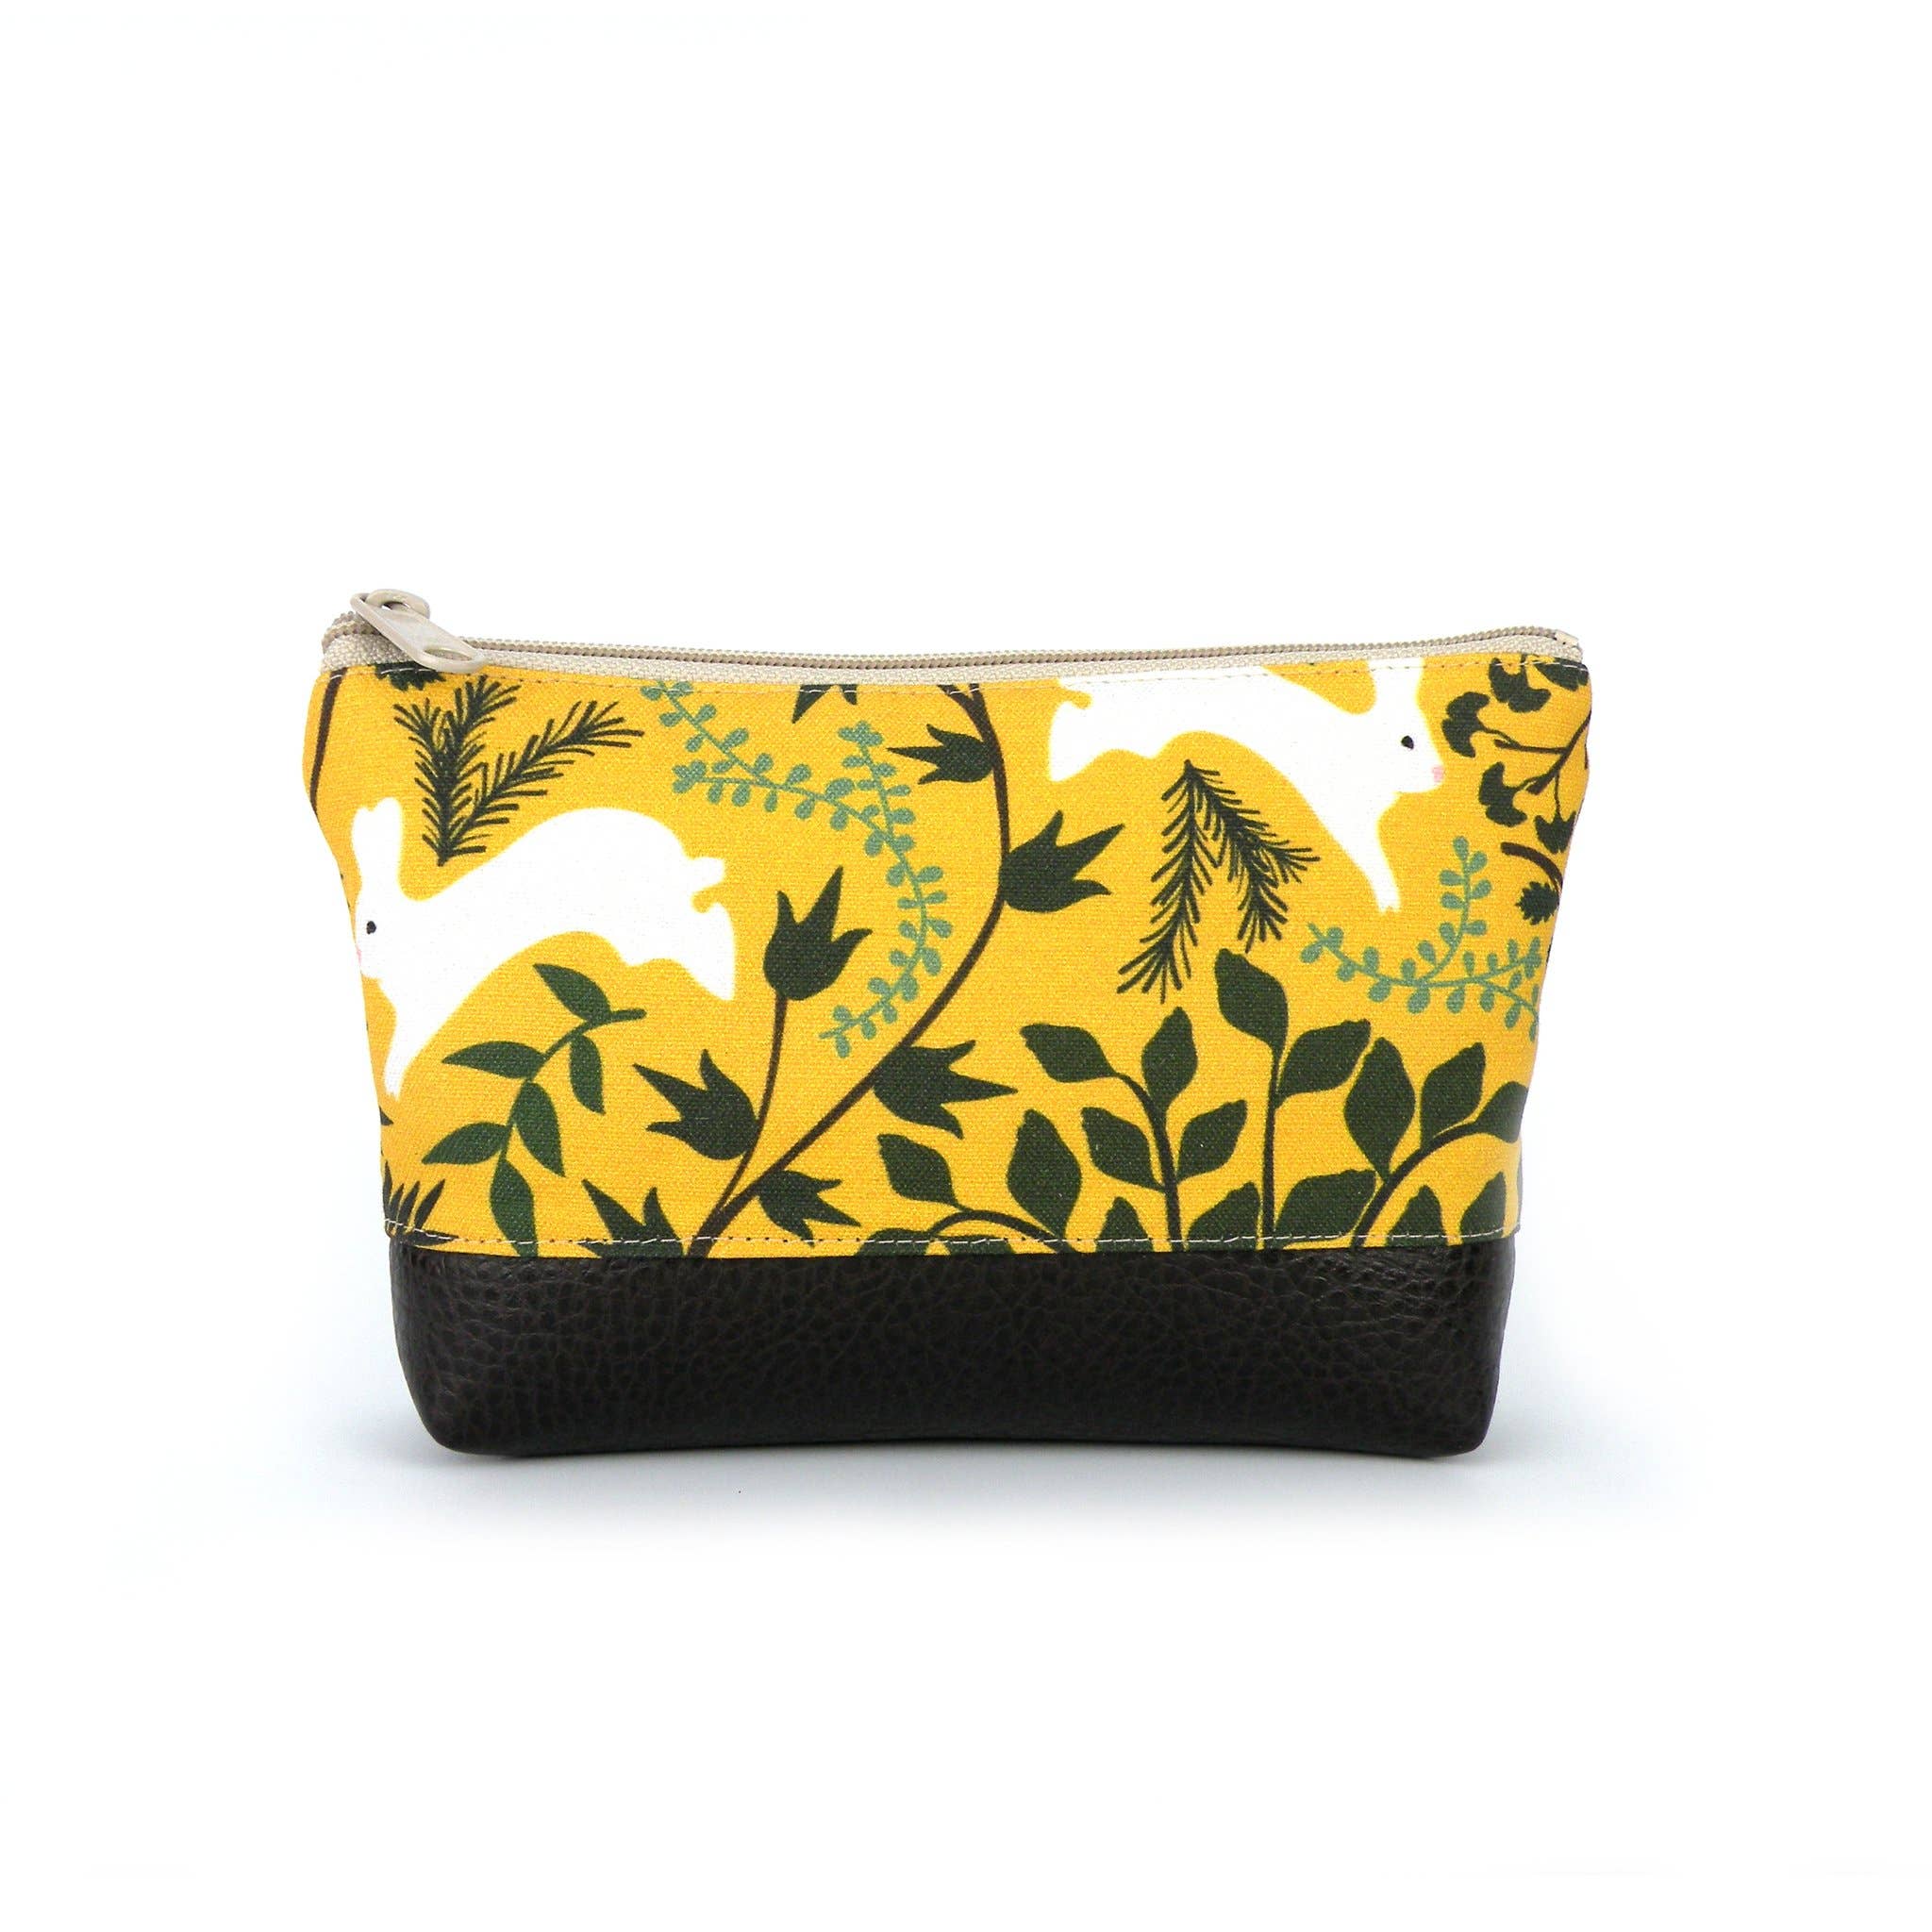 Small Cosmetic Clutch in Yellow Rabbit Print Linen